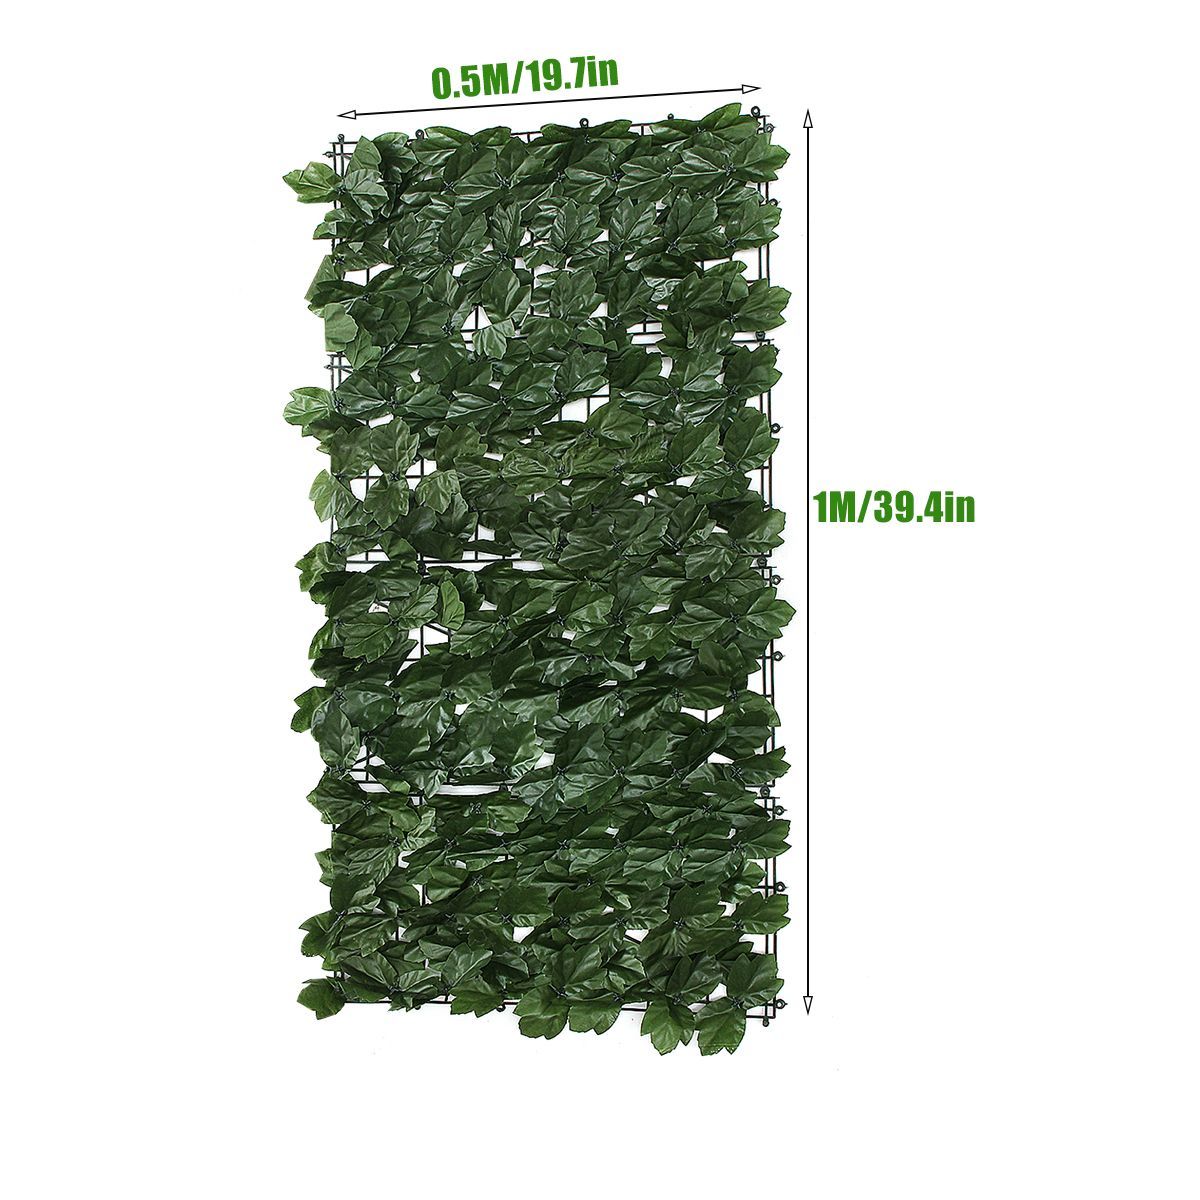 Artificial-Green-Fence-Art-Foliage-Hedge-Backdrop-Plant-Wall-Grass-Panel-Decorations-1646380